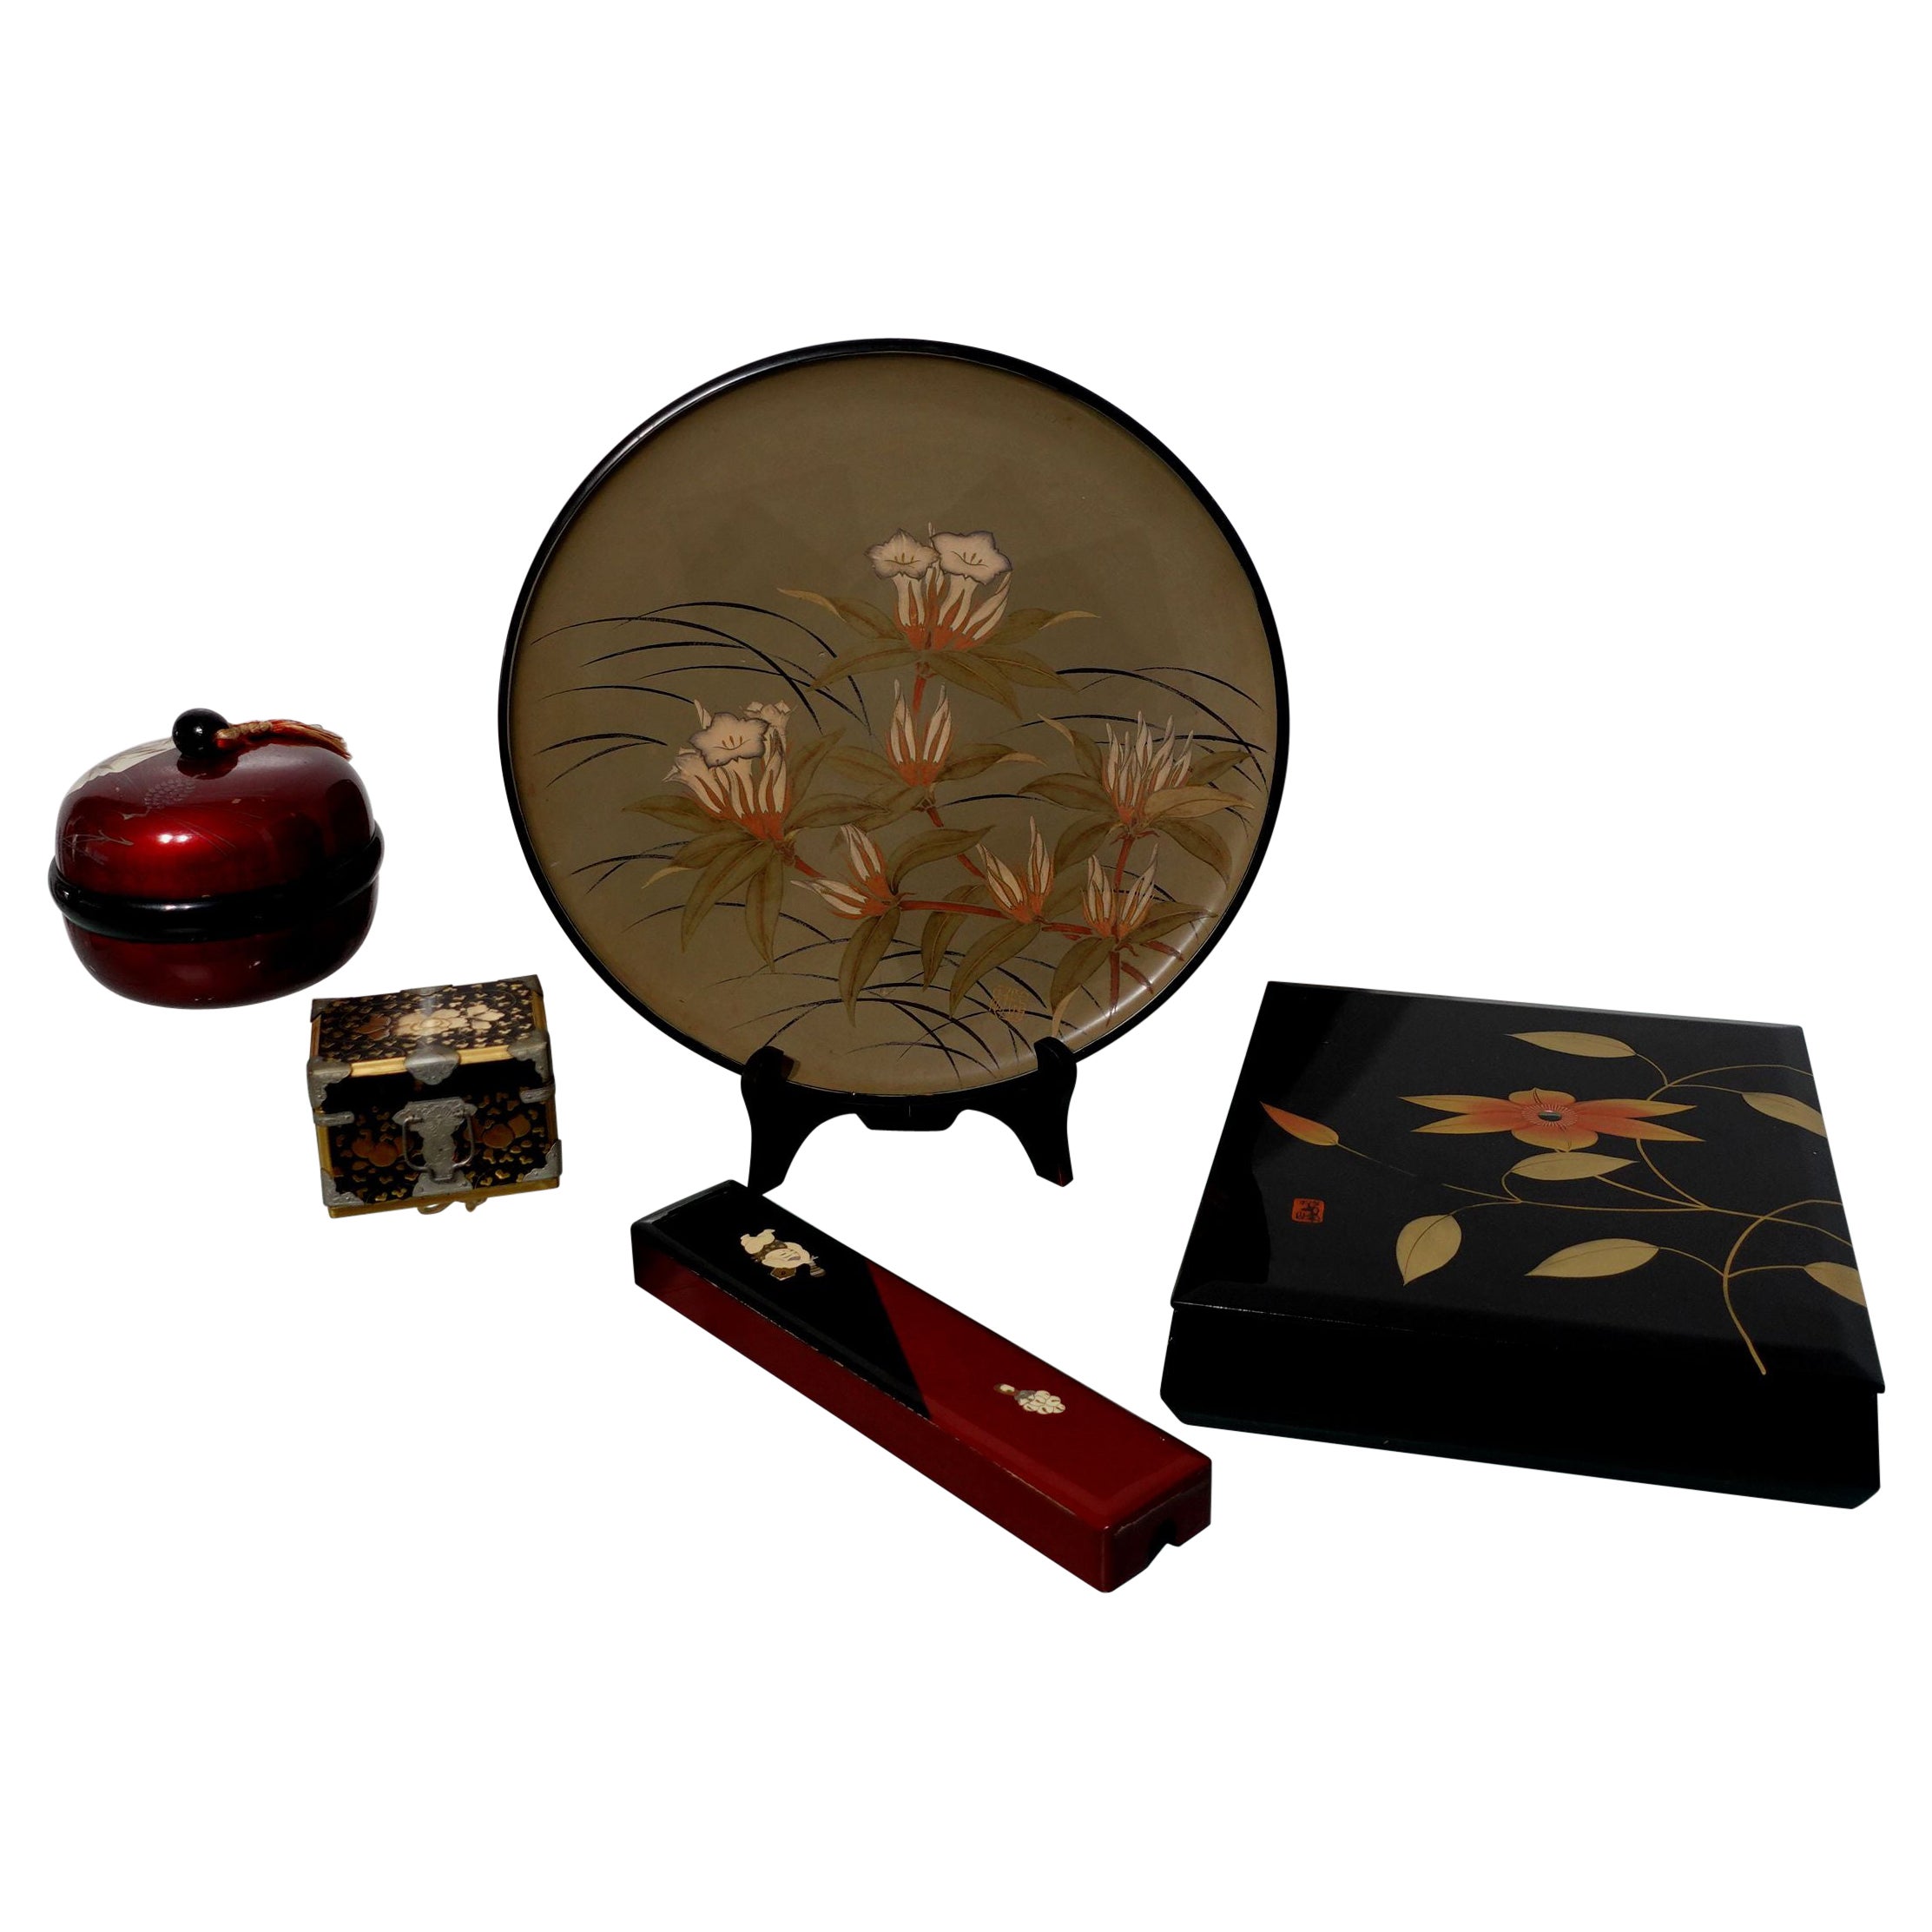 5 Items of Japanese Lacquer Art For Sale